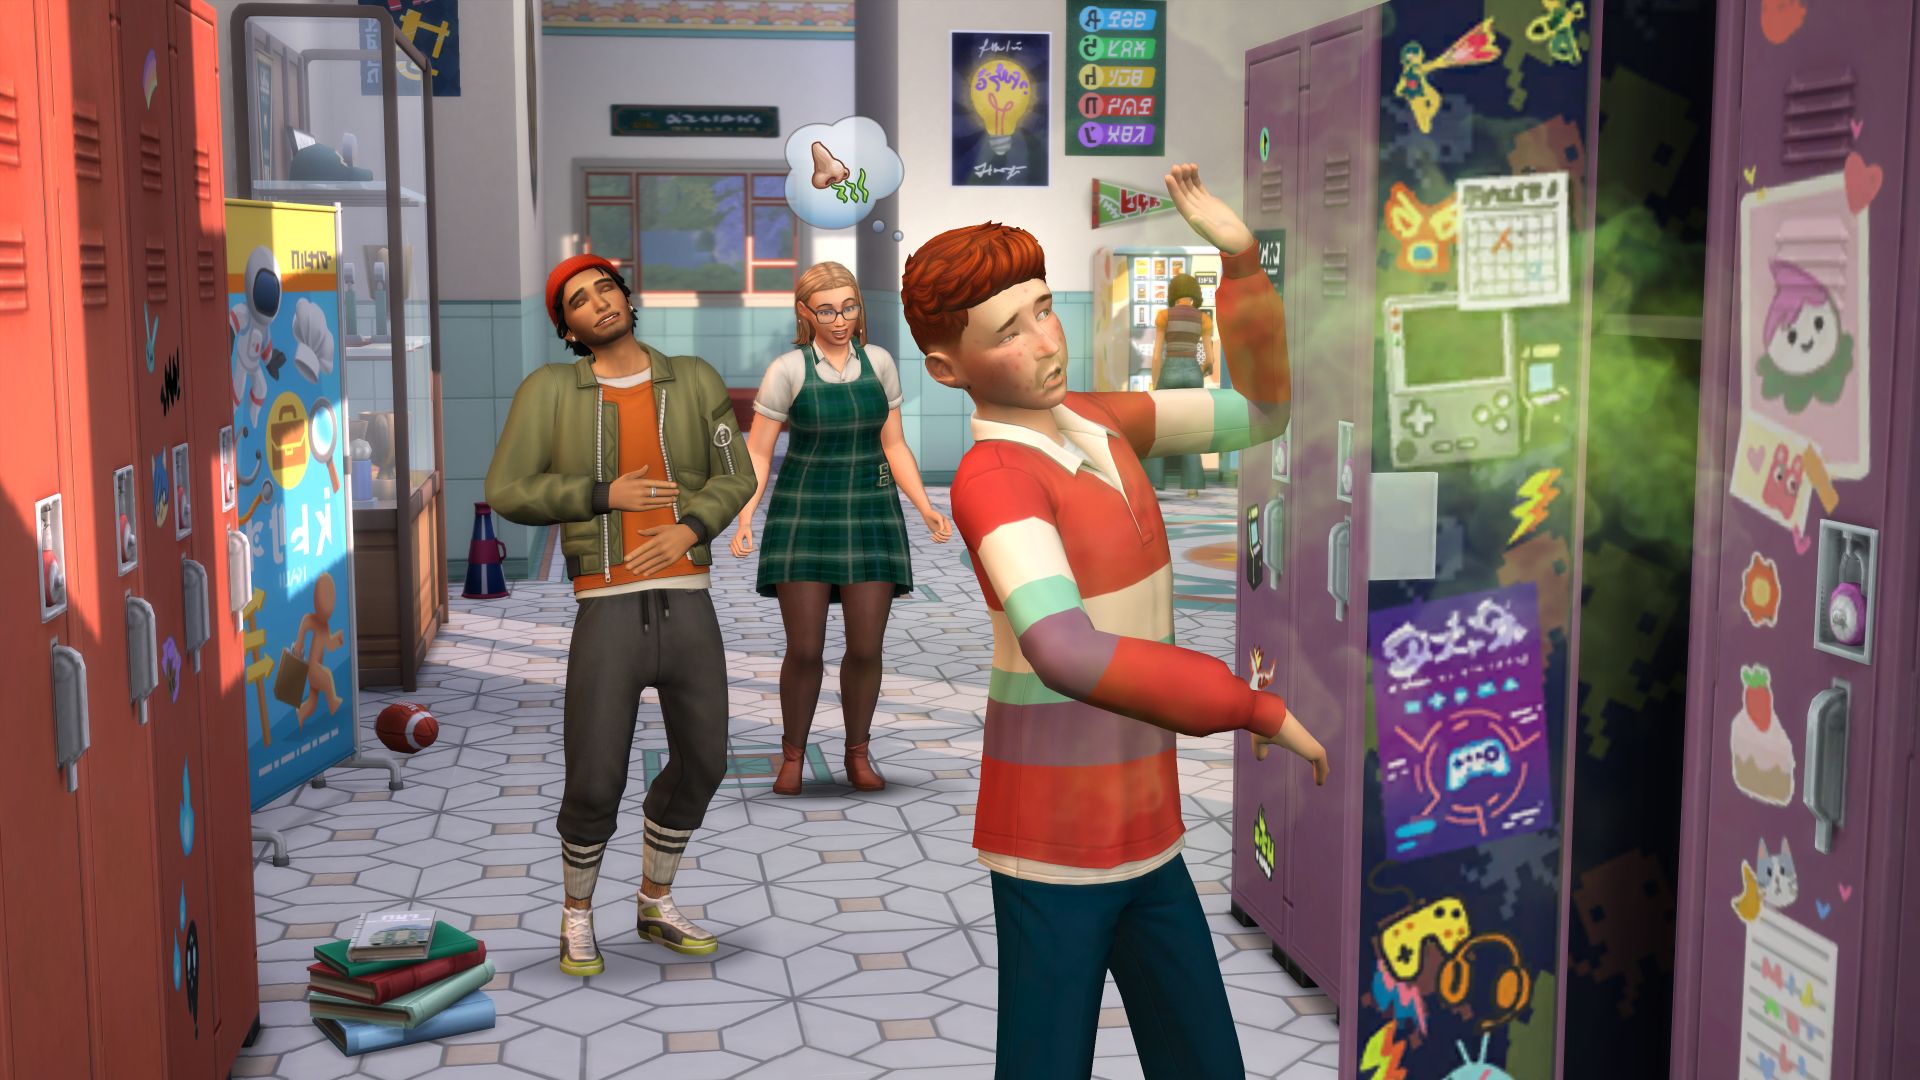 Download The Sims™ 4 Base Game for Free - Electronic Arts